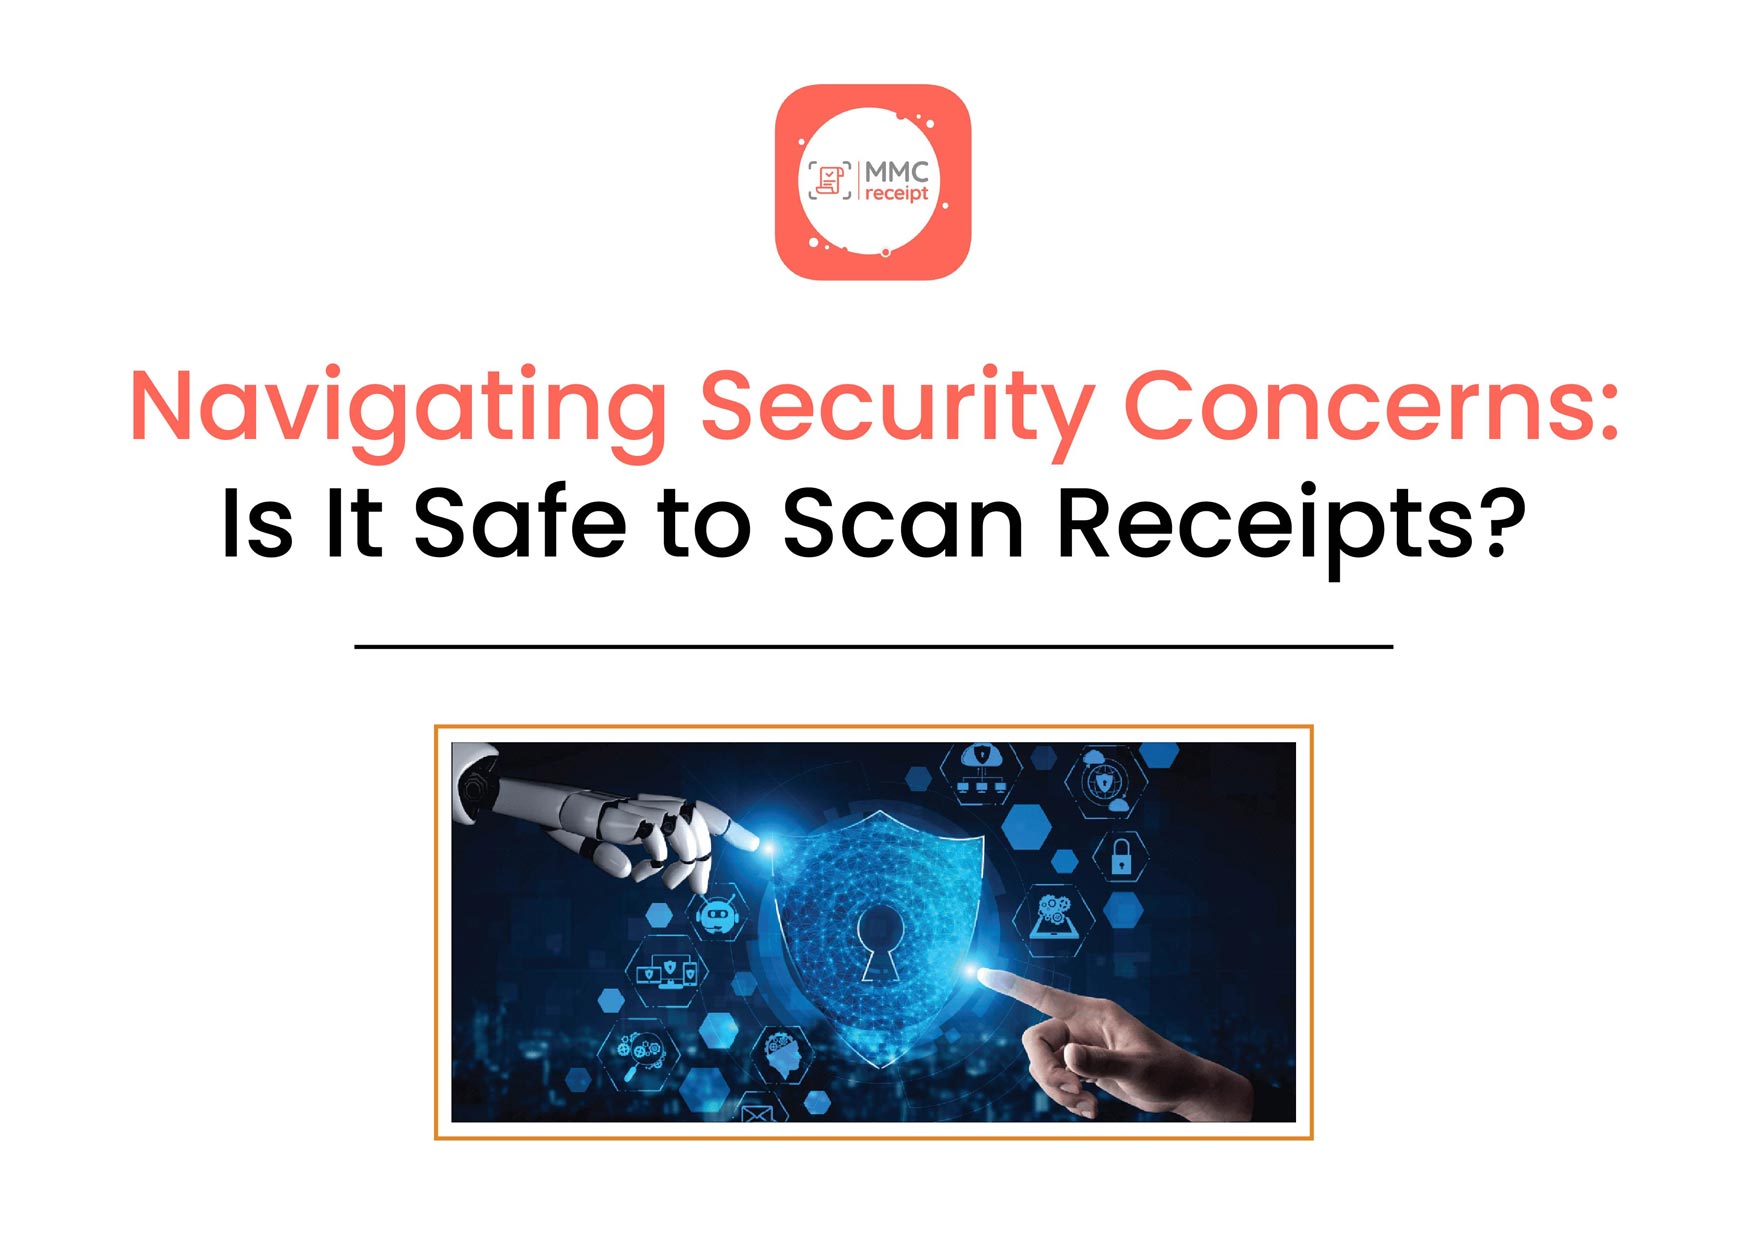 Navigating Security Concerns: Is It Safe to Scan Receipts?